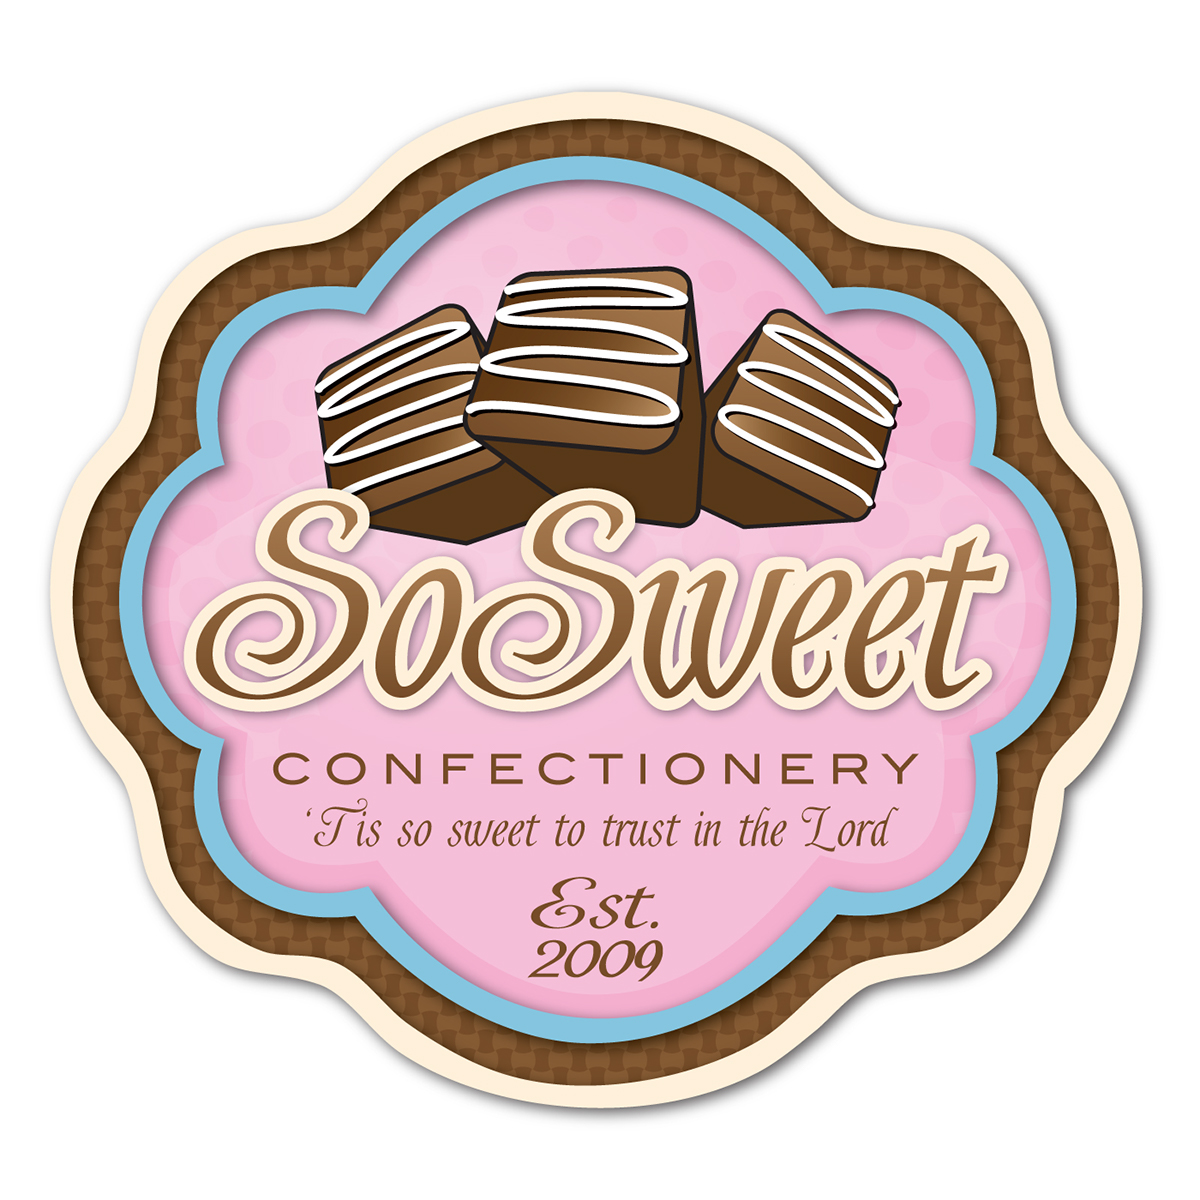 caramel chocolate bakery brainfirecre8v Confectionery Sweets Coffee logo sign